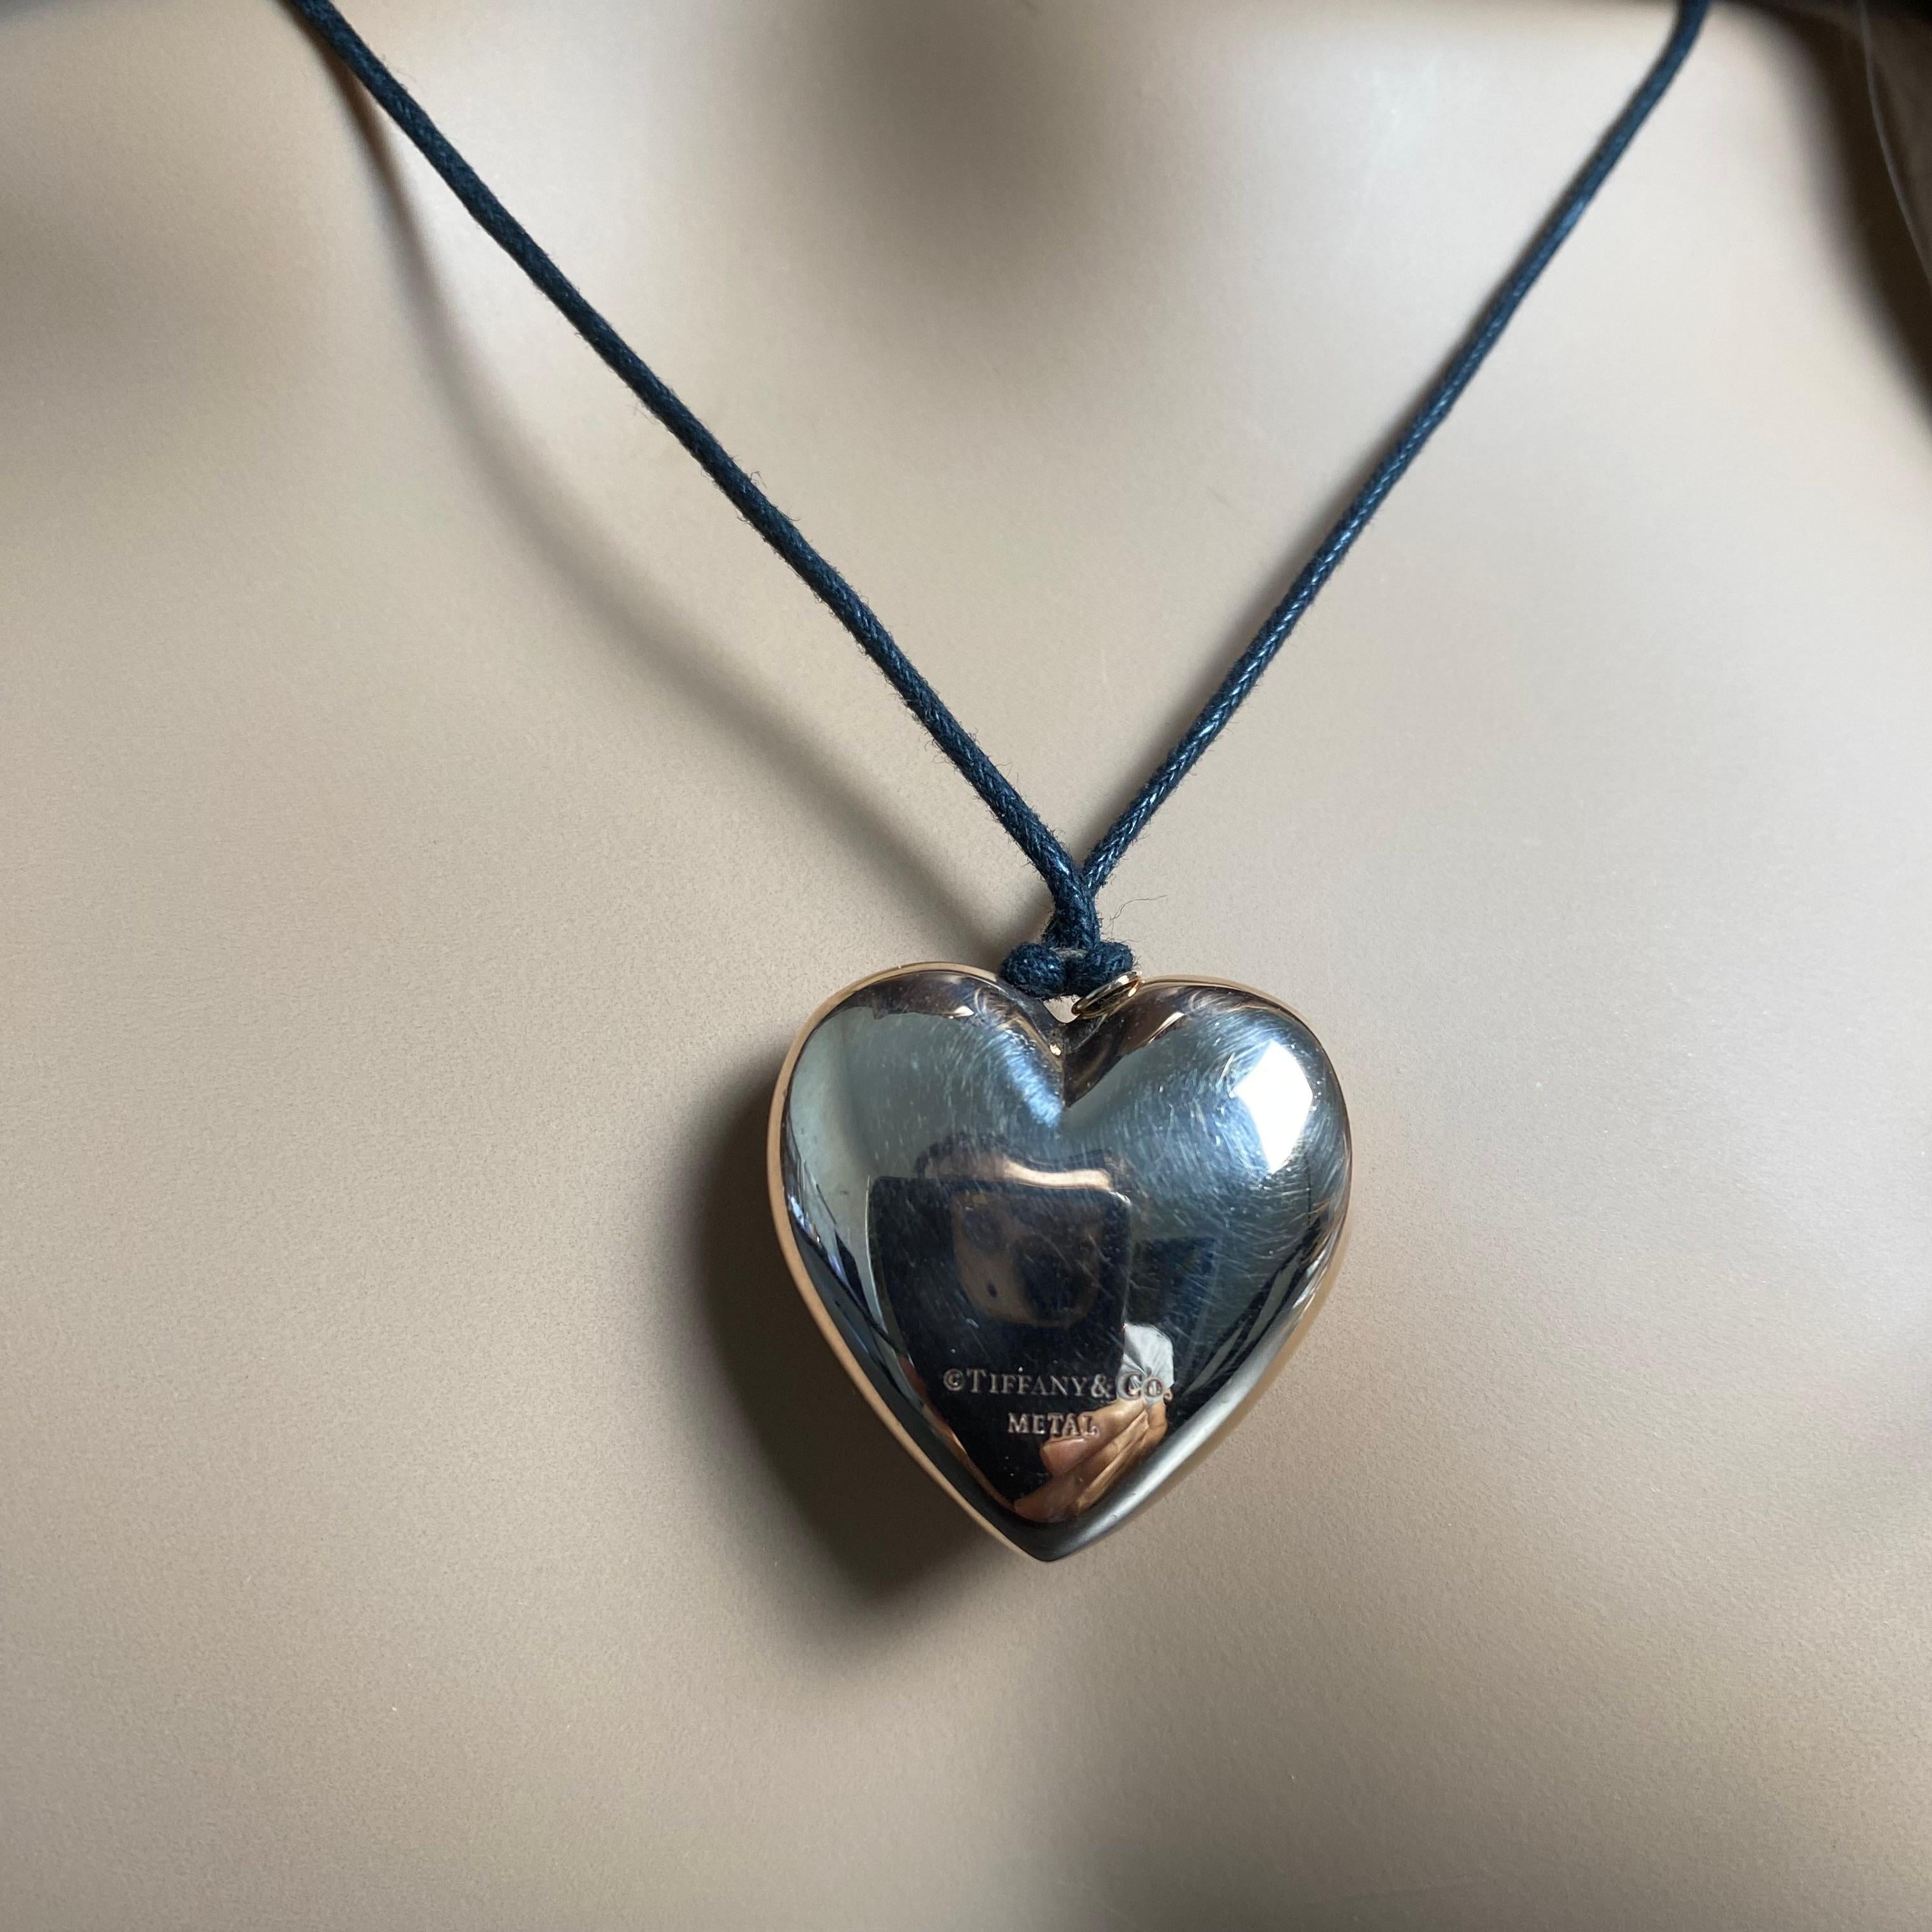 Contemporary Rare Tiffany Co Heart Shaped Mixture Gold Silver Metal One Inch Wide Necklace 